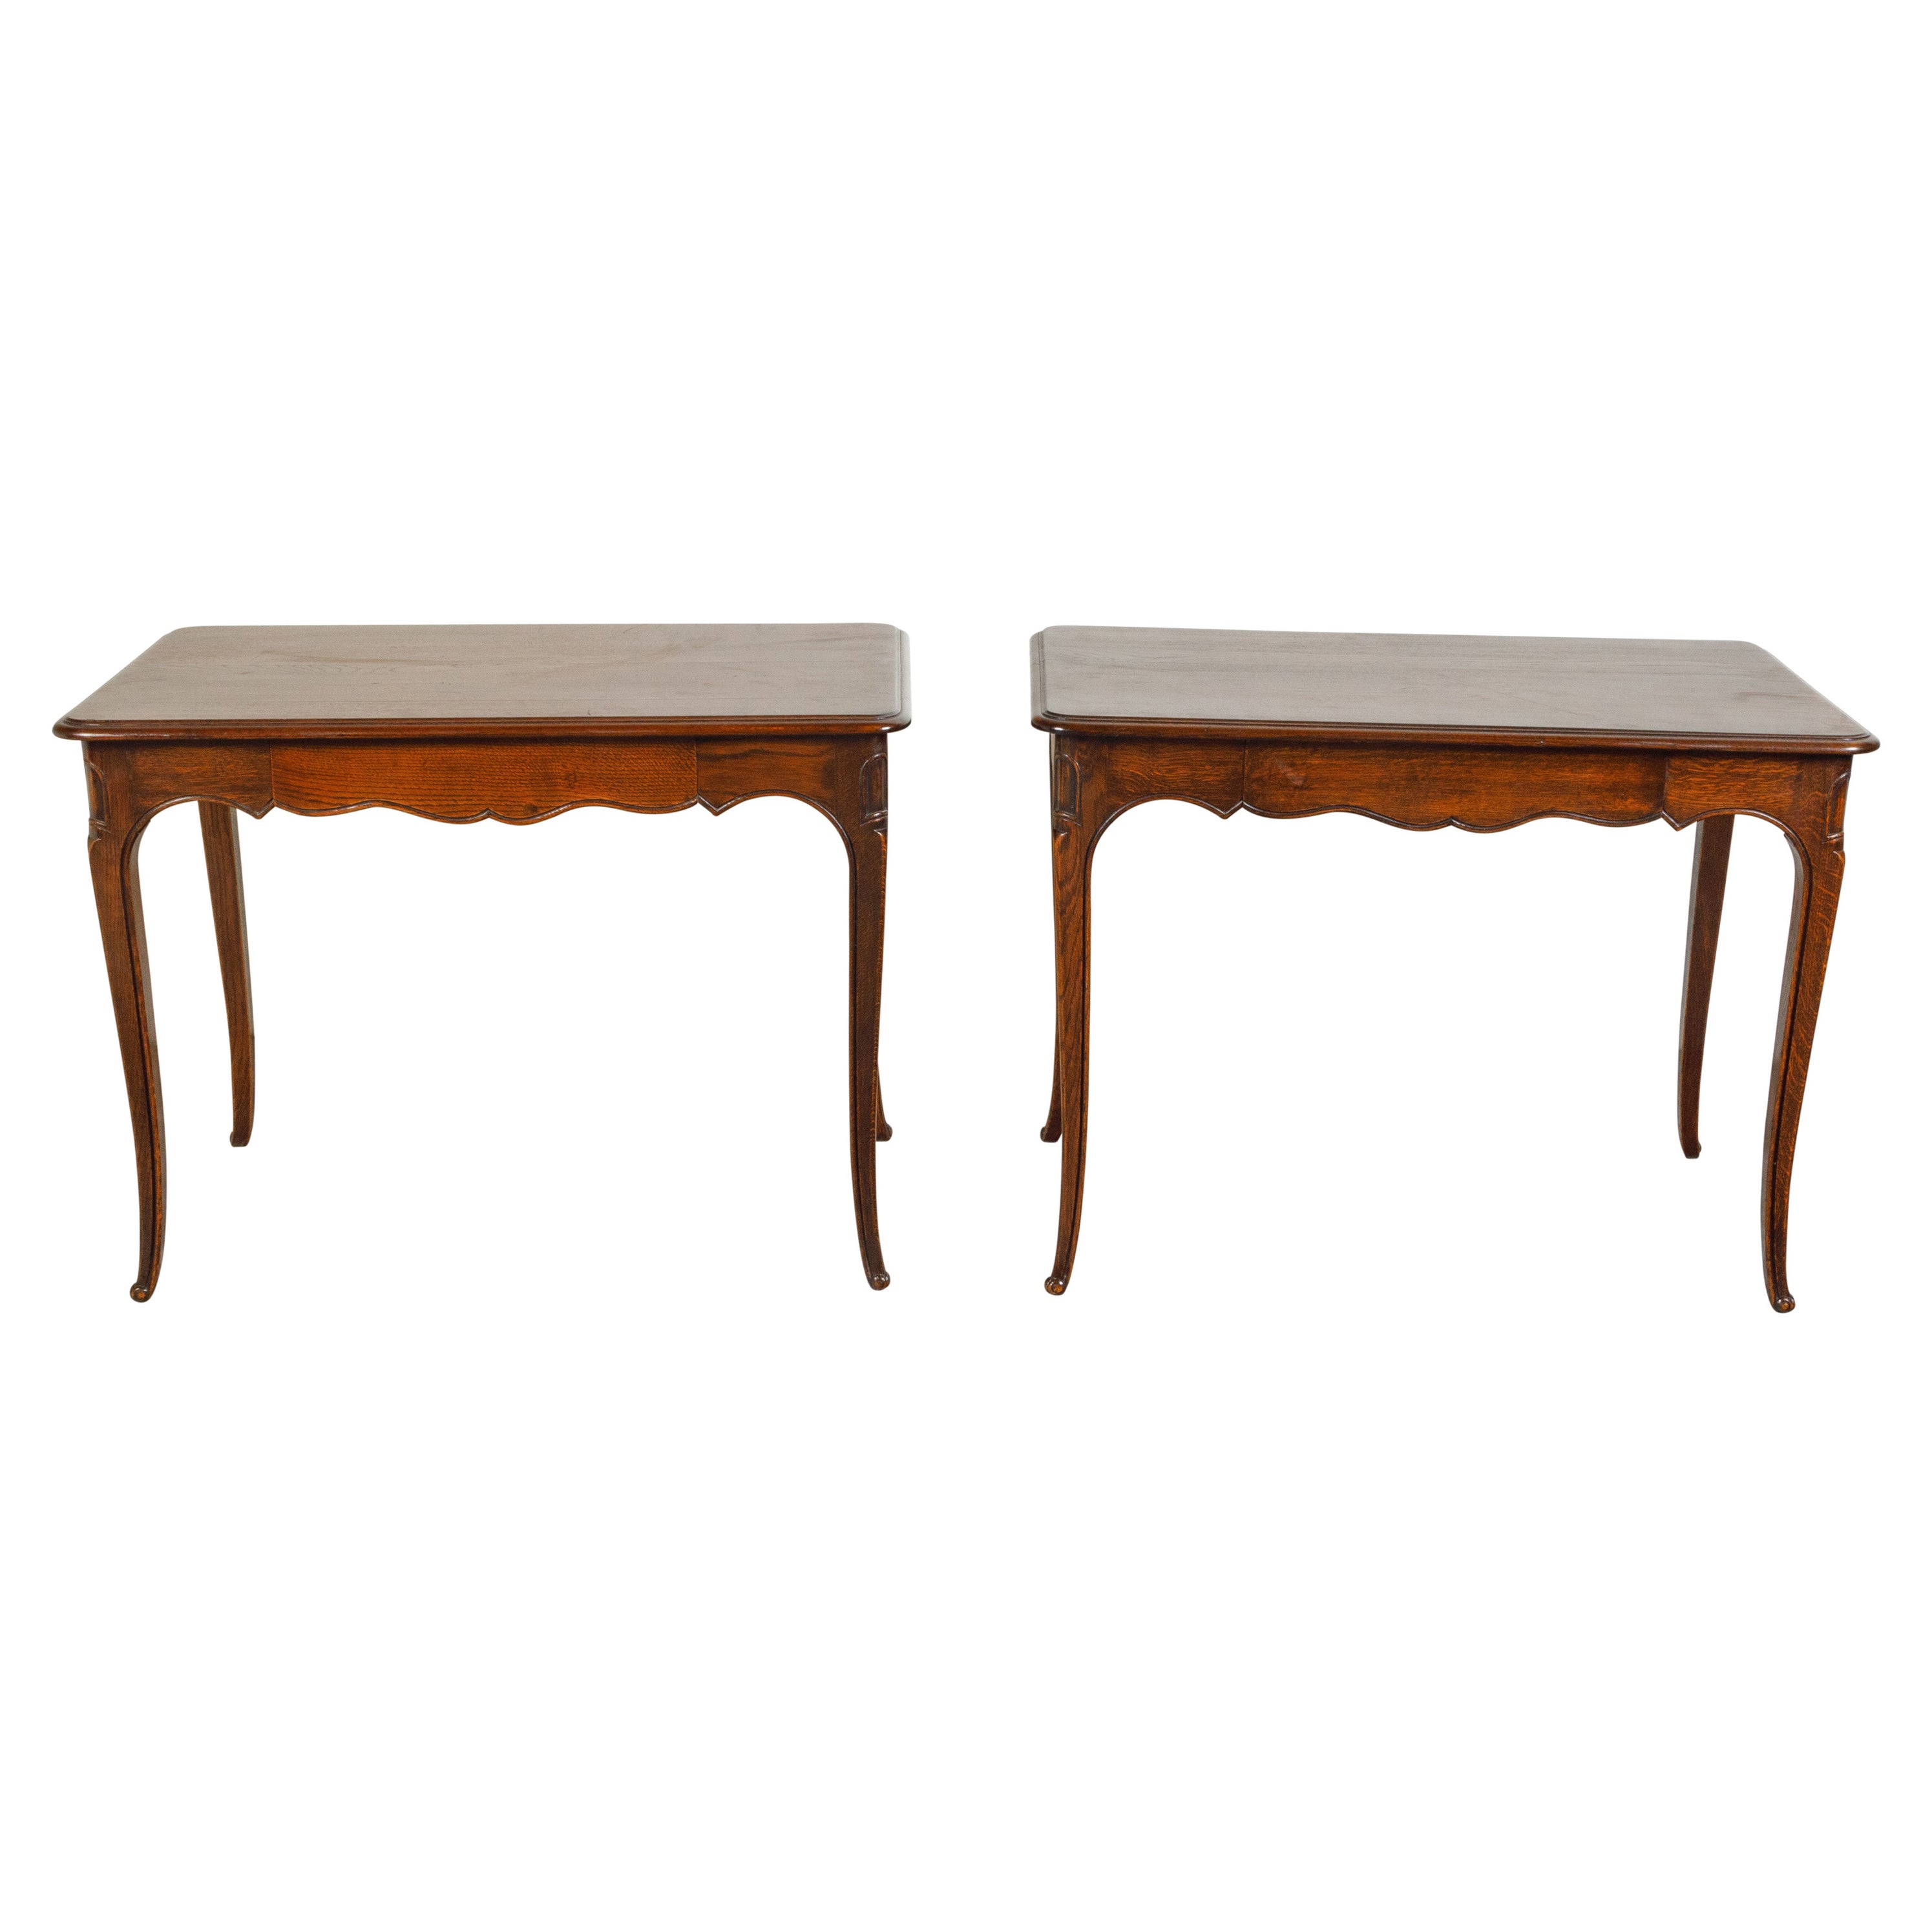 Pair of French 1900s Oak Console Tables with Single Drawers and Scalloped Aprons